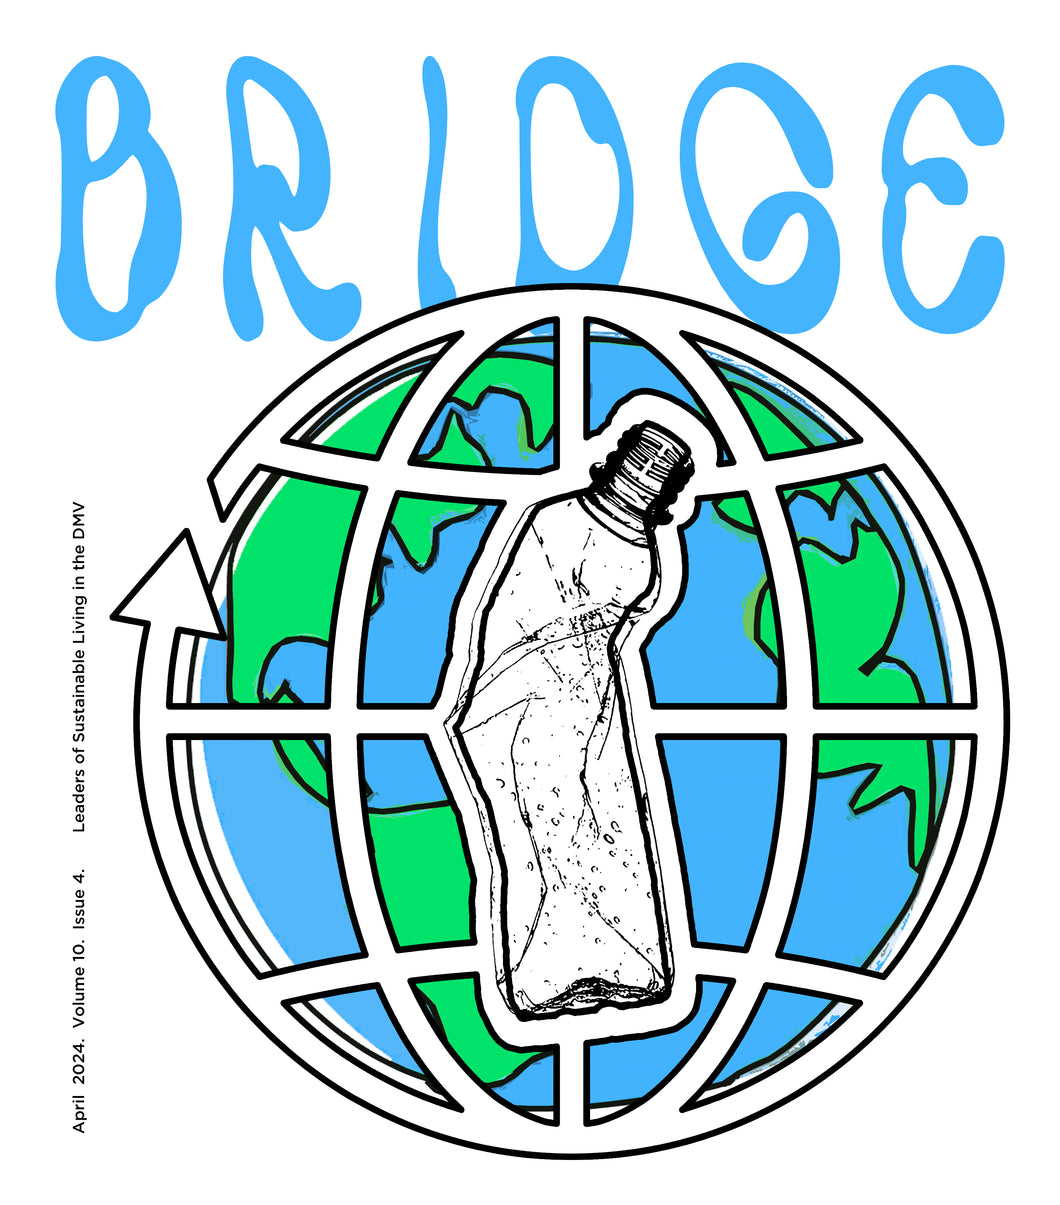 Bridge April '24 Issue - Leaders of Sustainable Living in the DMV